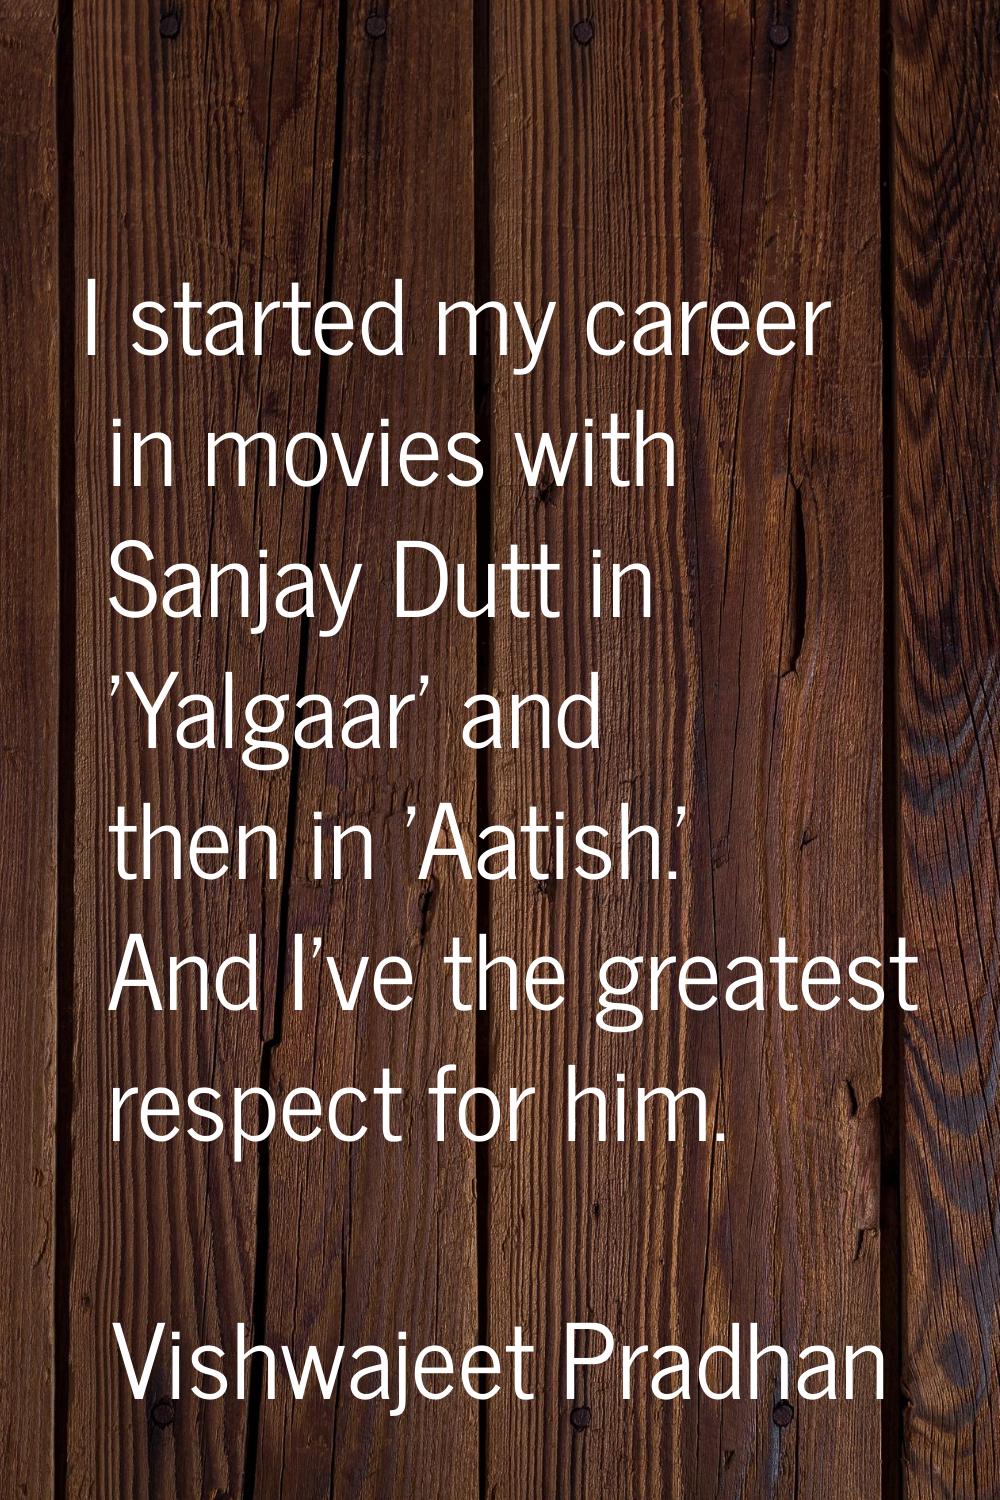 I started my career in movies with Sanjay Dutt in 'Yalgaar' and then in 'Aatish.' And I've the grea